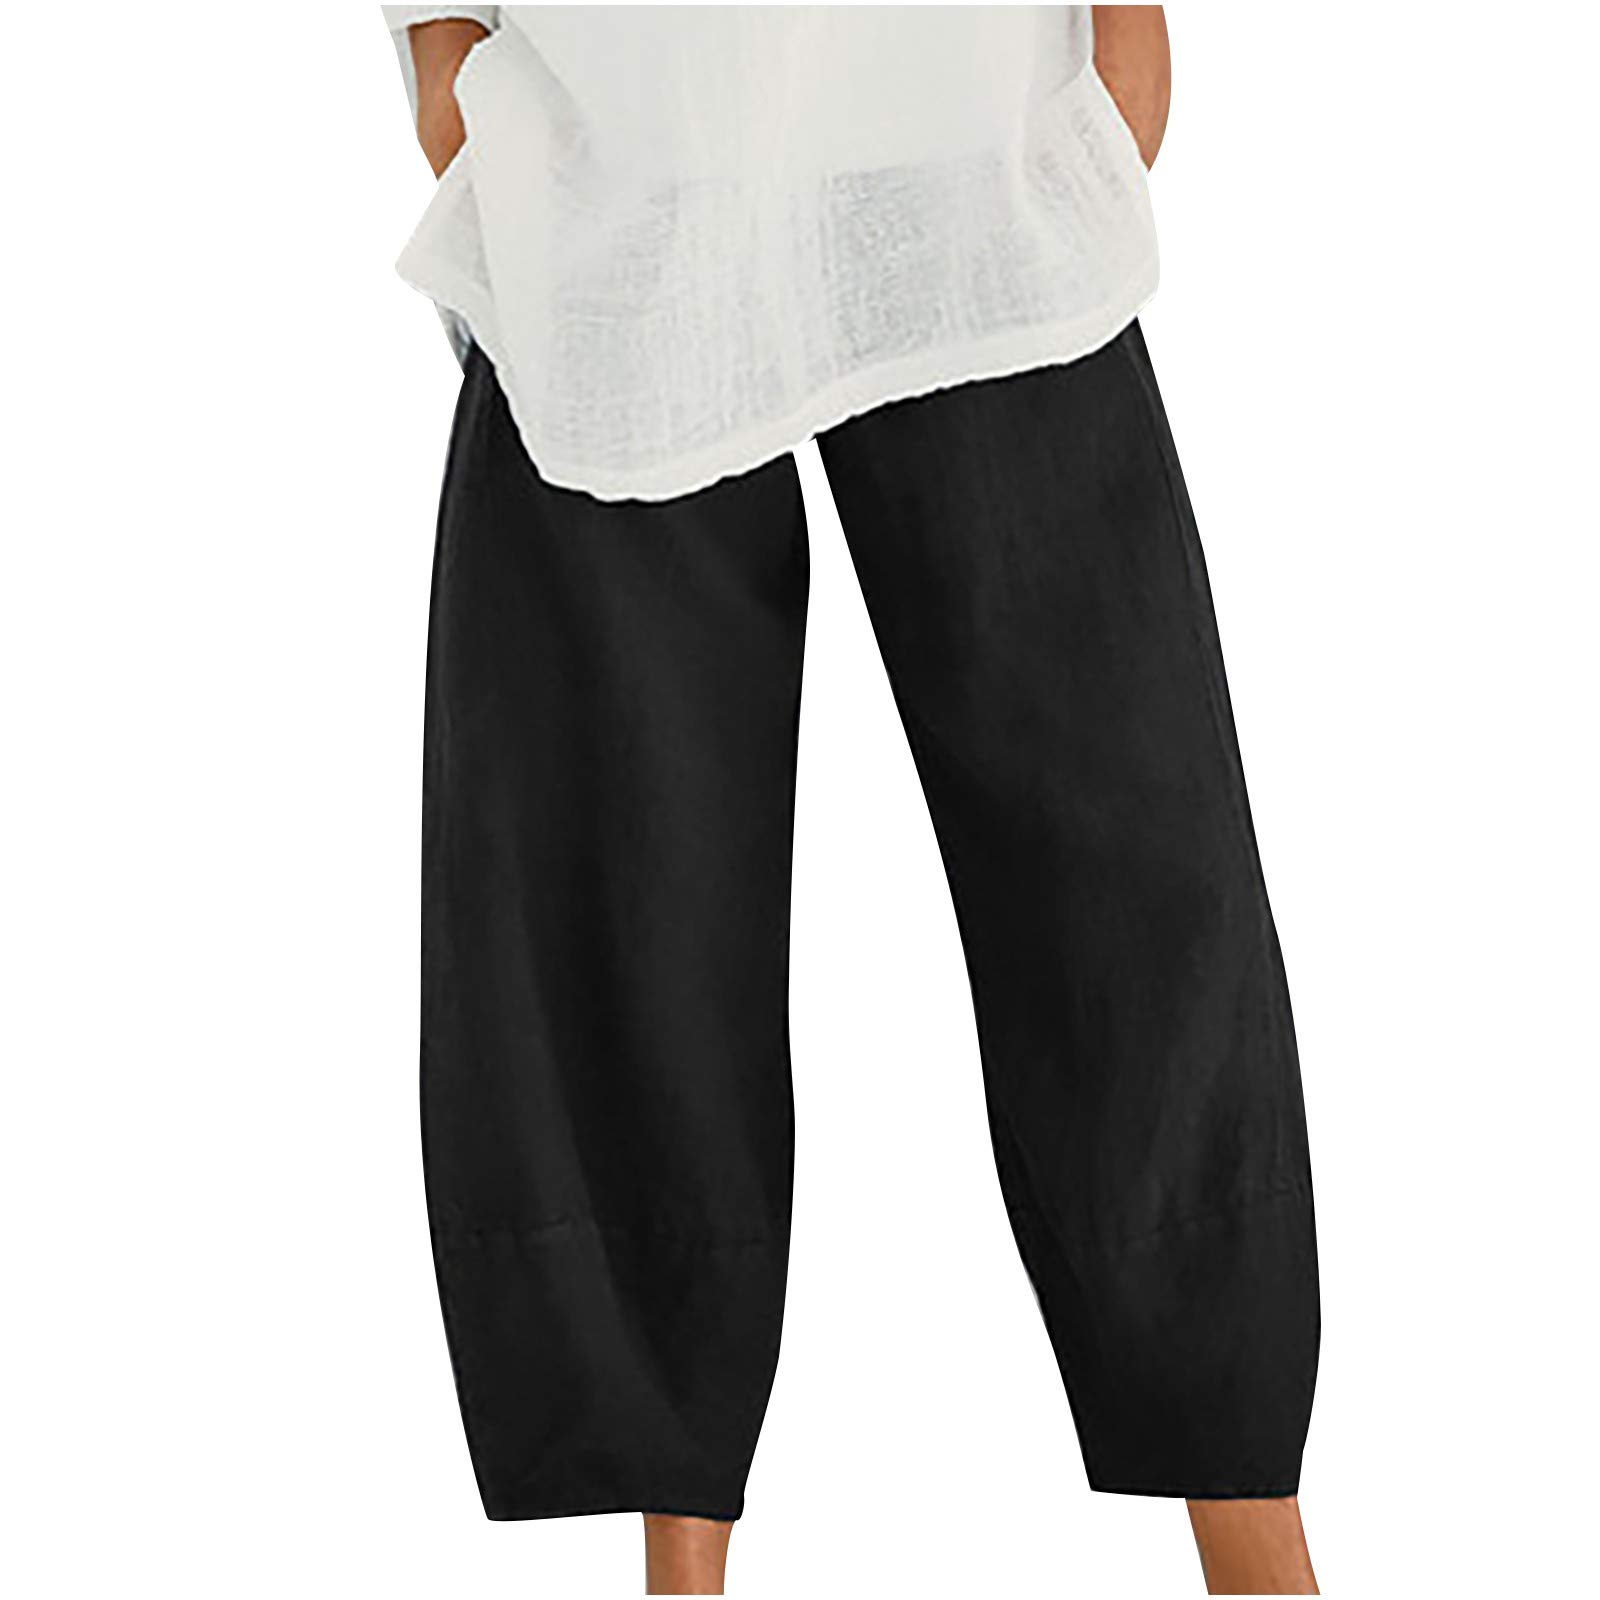 Womens Cotton Linen Capri Pants Casual Drawstring Elastic Waist Comfy  Cropped Pants 3/4 Length Trousers with Pockets